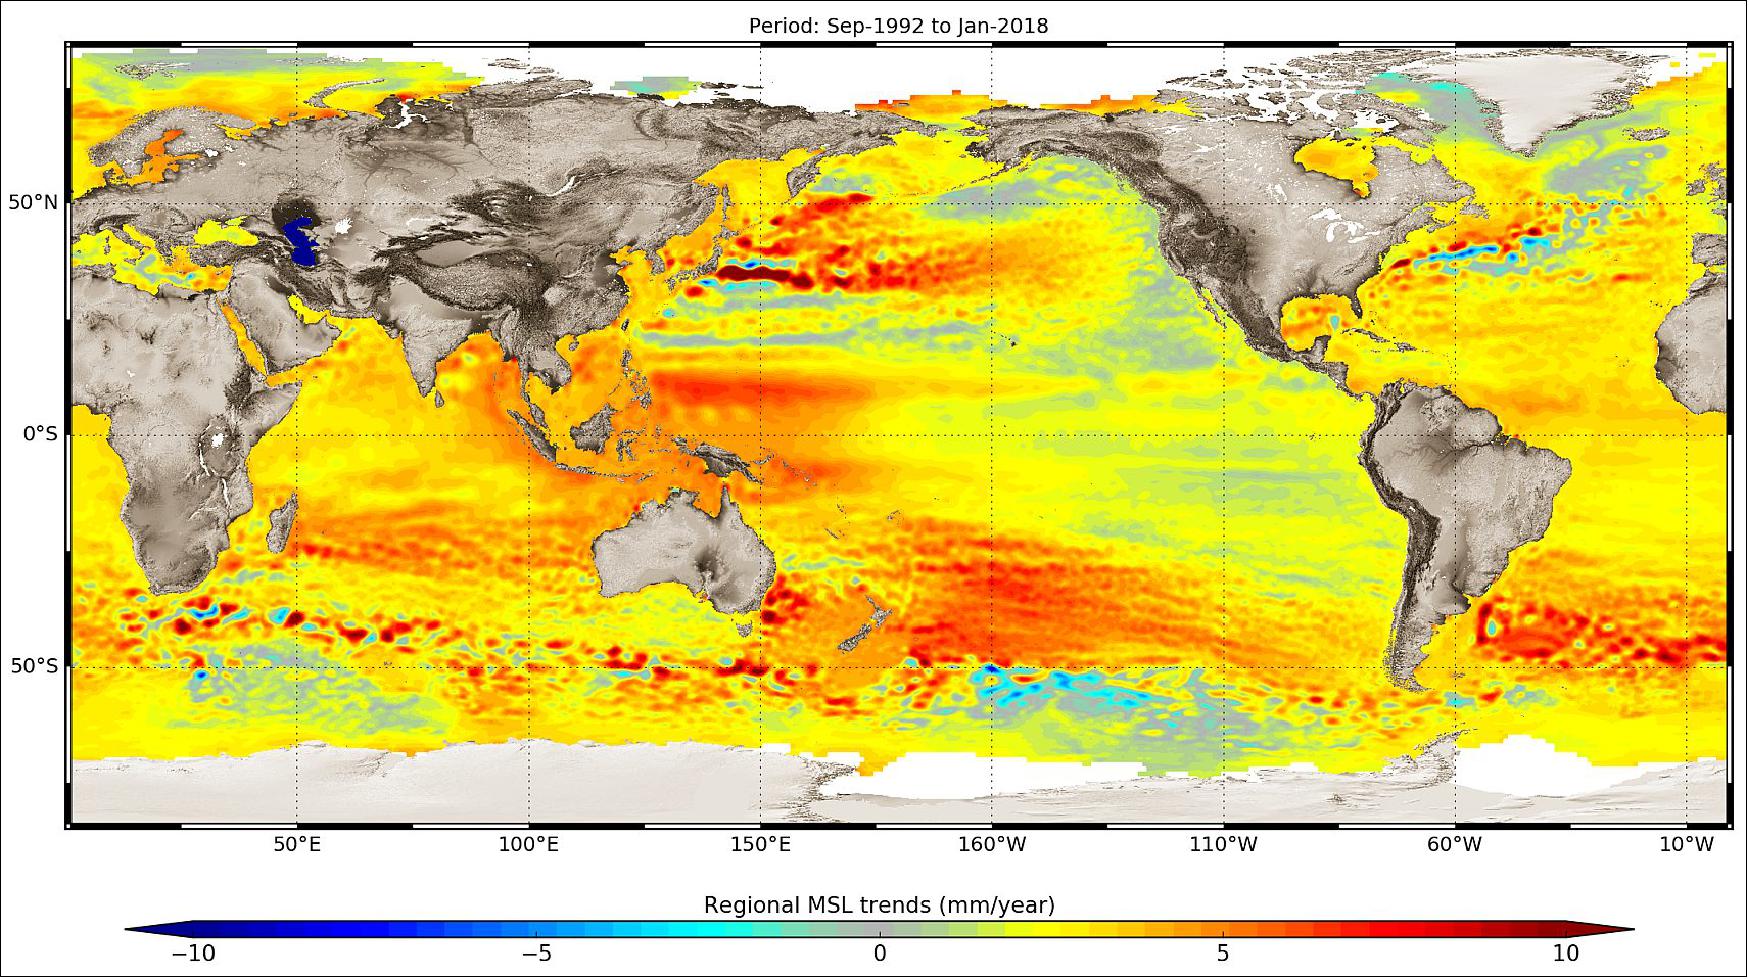 Figure 63: On average, between 1993 and 2018 sea level has risen by 3.2 mm but there are regional differences within this trend. This map is based on measurements from satellite altimeters and shows regional sea-level trends [image credit: CNES/LEGOS/CLS/EU Copernicus Marine Service/contains modified Copernicus Sentinel data (2018)]